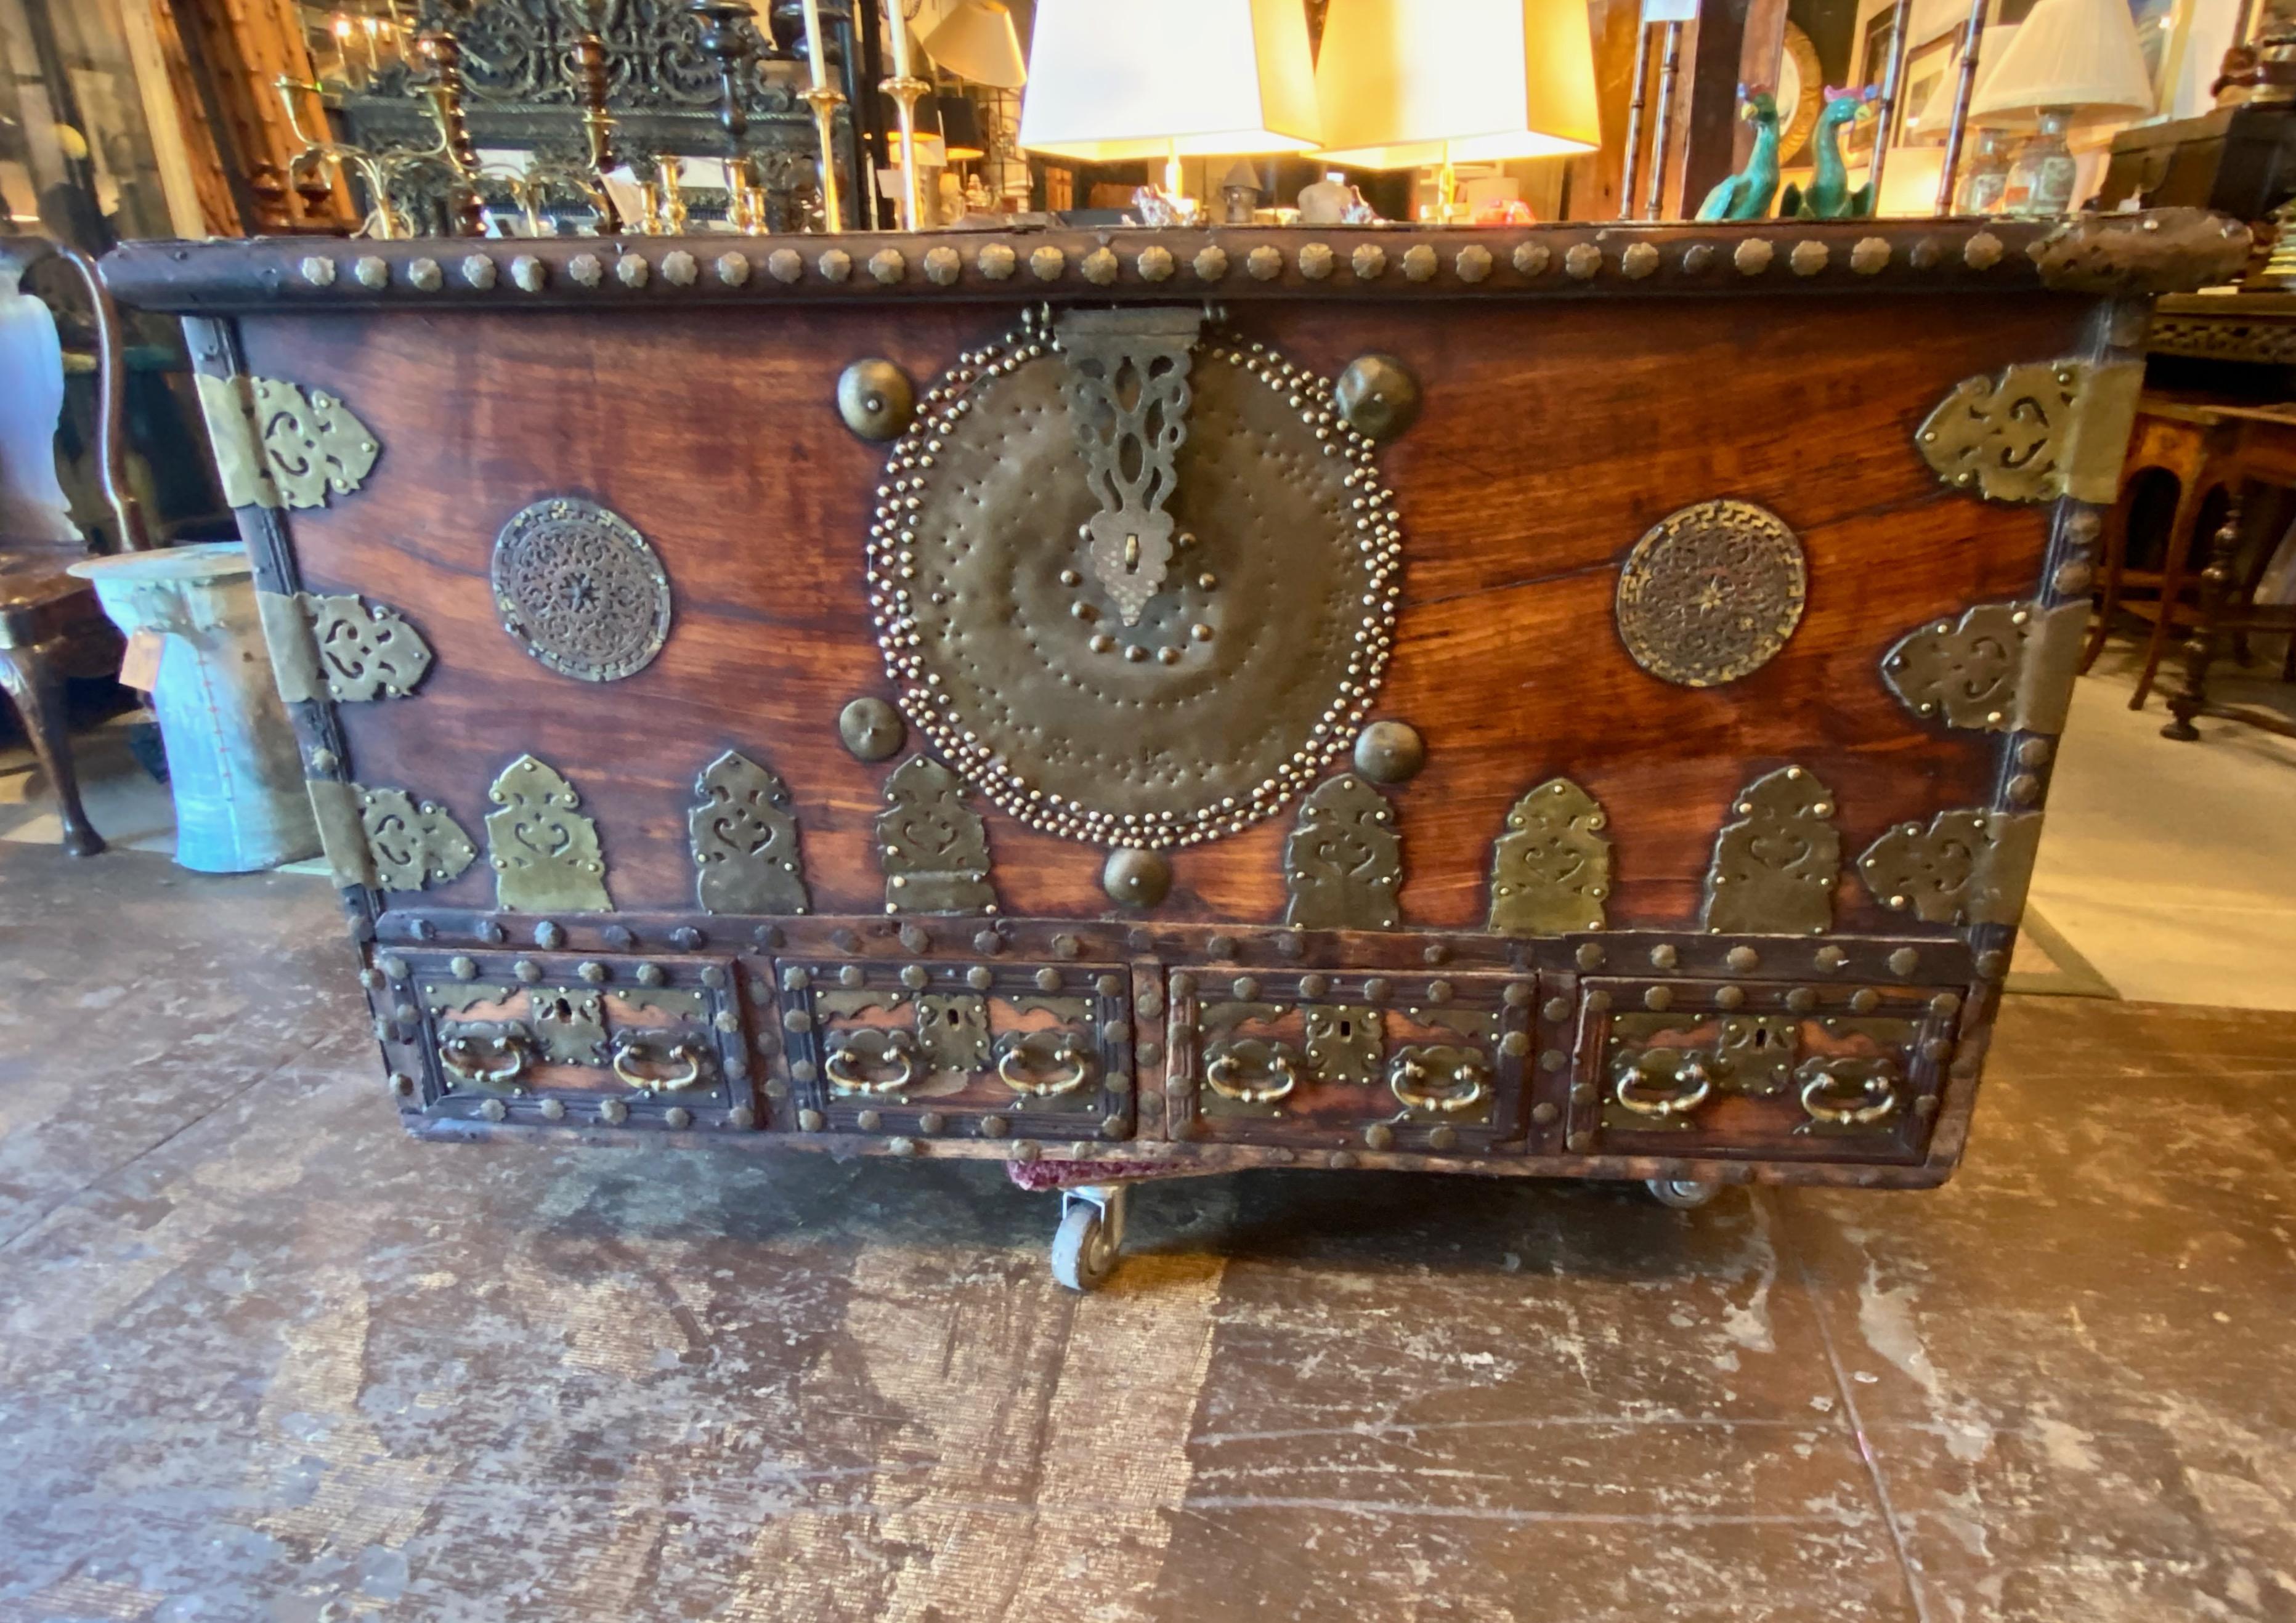 This is a very good example of a 19th century Zanzibar storage chest. The chest was created in the mid-19th century. The teak case is adorned with cut and open work brass strapping in addition to nail head decoration. The chest shows a deep natural